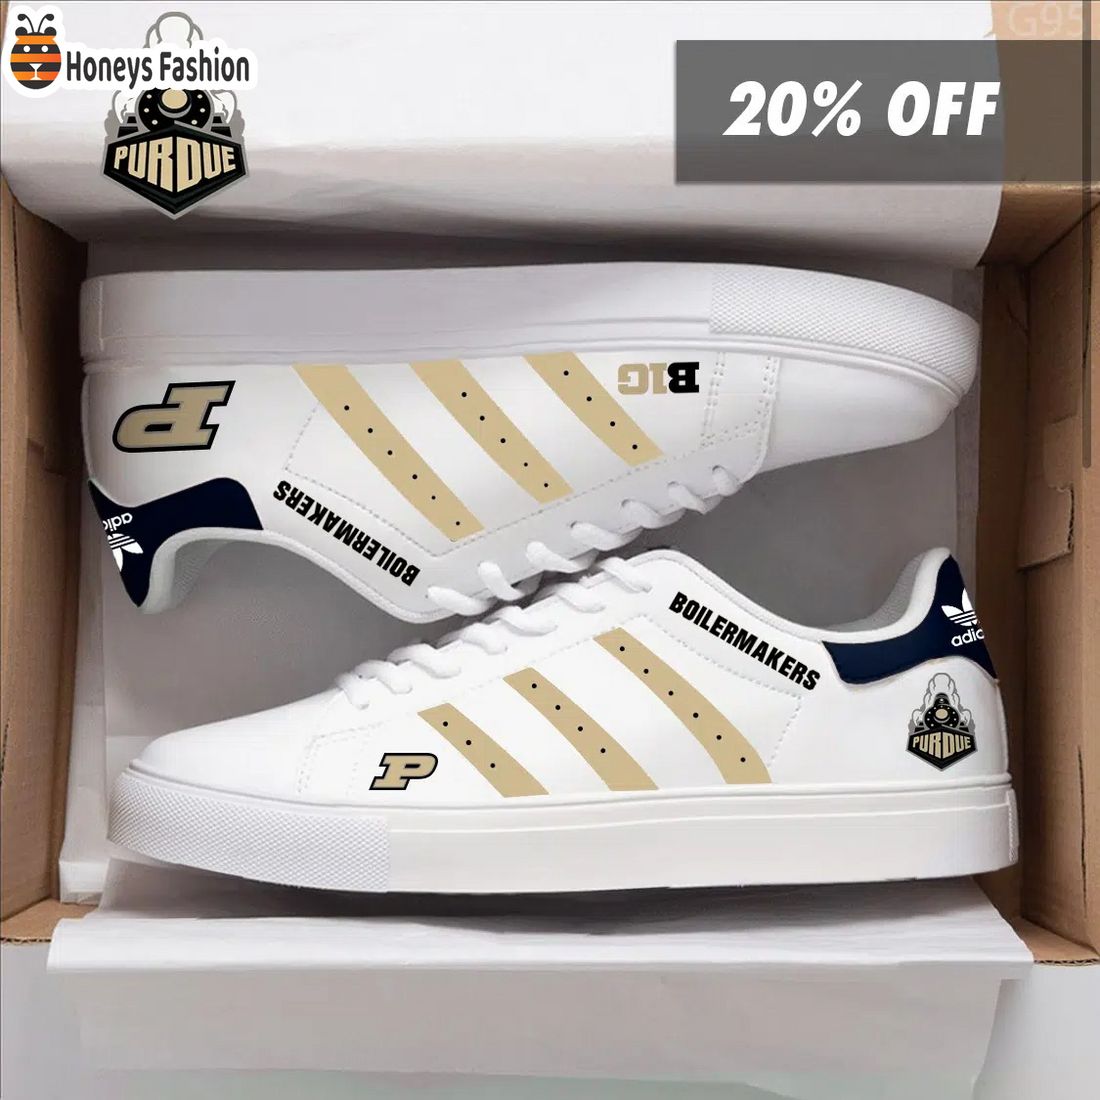 Purdue Boilermakers NCAA Adidas Stan Smith Shoes